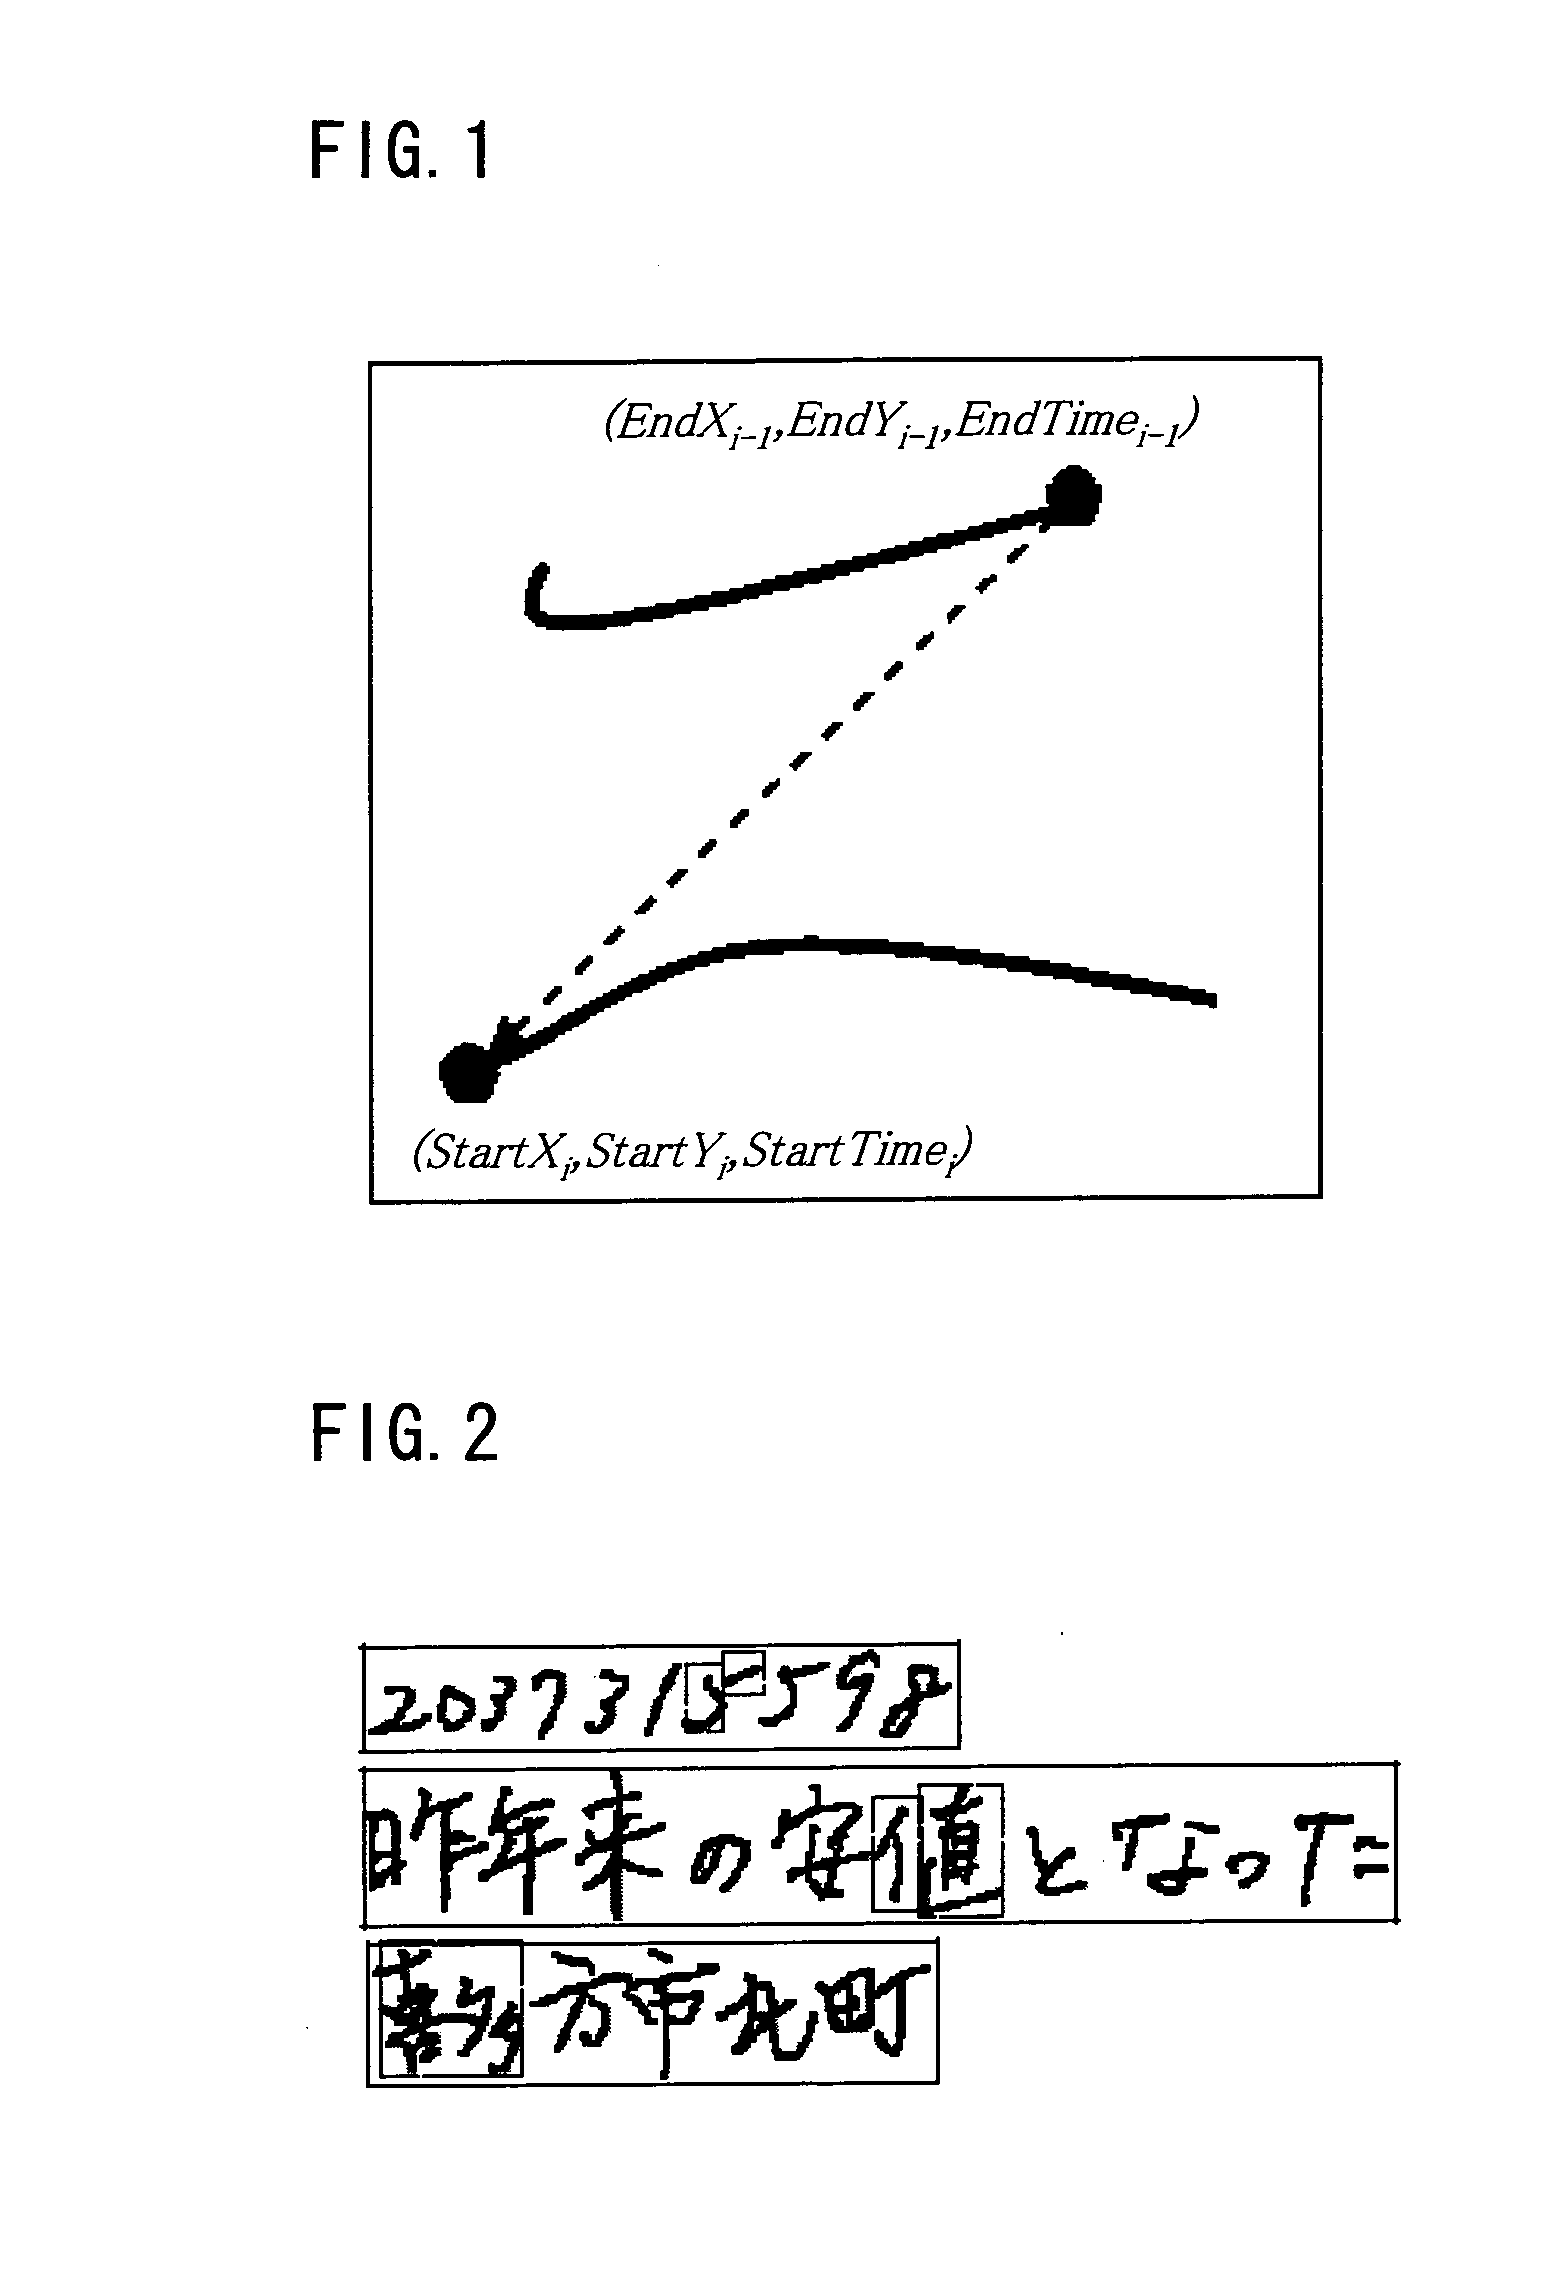 Handwriting recognition method and device